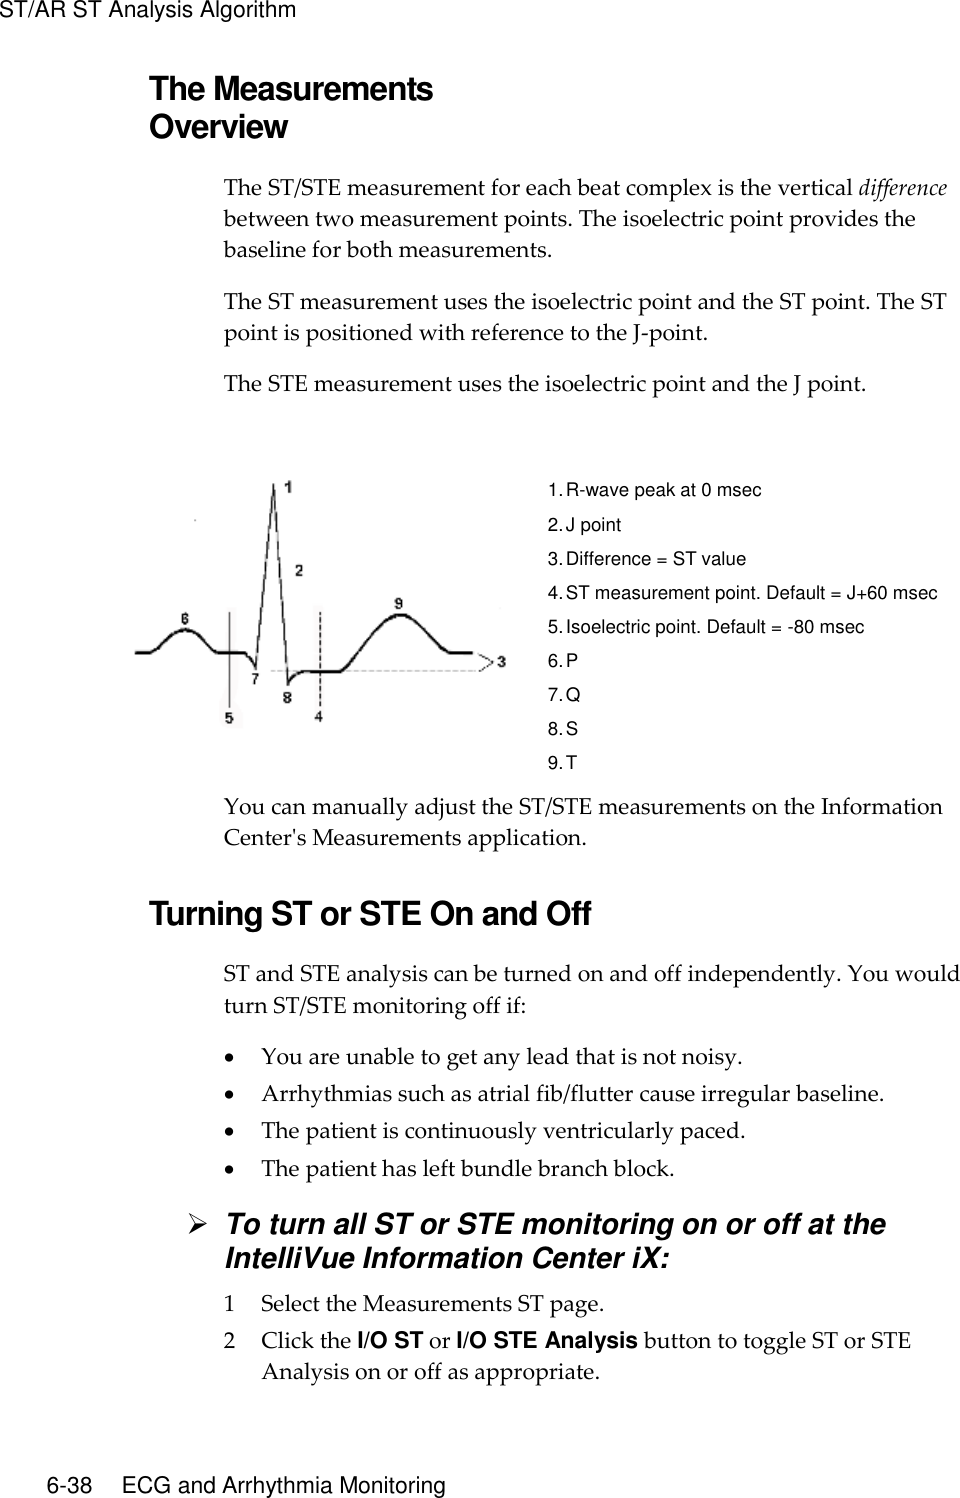 ST/AR ST Analysis Algorithm   6-38    ECG and Arrhythmia Monitoring The Measurements Overview The ST/STE measurement for each beat complex is the vertical difference between two measurement points. The isoelectric point provides the baseline for both measurements.   The ST measurement uses the isoelectric point and the ST point. The ST point is positioned with reference to the J-point.   The STE measurement uses the isoelectric point and the J point.     1. R-wave peak at 0 msec 2. J point 3. Difference = ST value 4. ST measurement point. Default = J+60 msec 5. Isoelectric point. Default = -80 msec 6. P 7. Q 8. S 9. T You can manually adjust the ST/STE measurements on the Information Center&apos;s Measurements application.  Turning ST or STE On and Off ST and STE analysis can be turned on and off independently. You would turn ST/STE monitoring off if:  You are unable to get any lead that is not noisy.  Arrhythmias such as atrial fib/flutter cause irregular baseline.  The patient is continuously ventricularly paced.  The patient has left bundle branch block.  To turn all ST or STE monitoring on or off at the IntelliVue Information Center iX: 1 Select the Measurements ST page. 2 Click the I/O ST or I/O STE Analysis button to toggle ST or STE Analysis on or off as appropriate. 